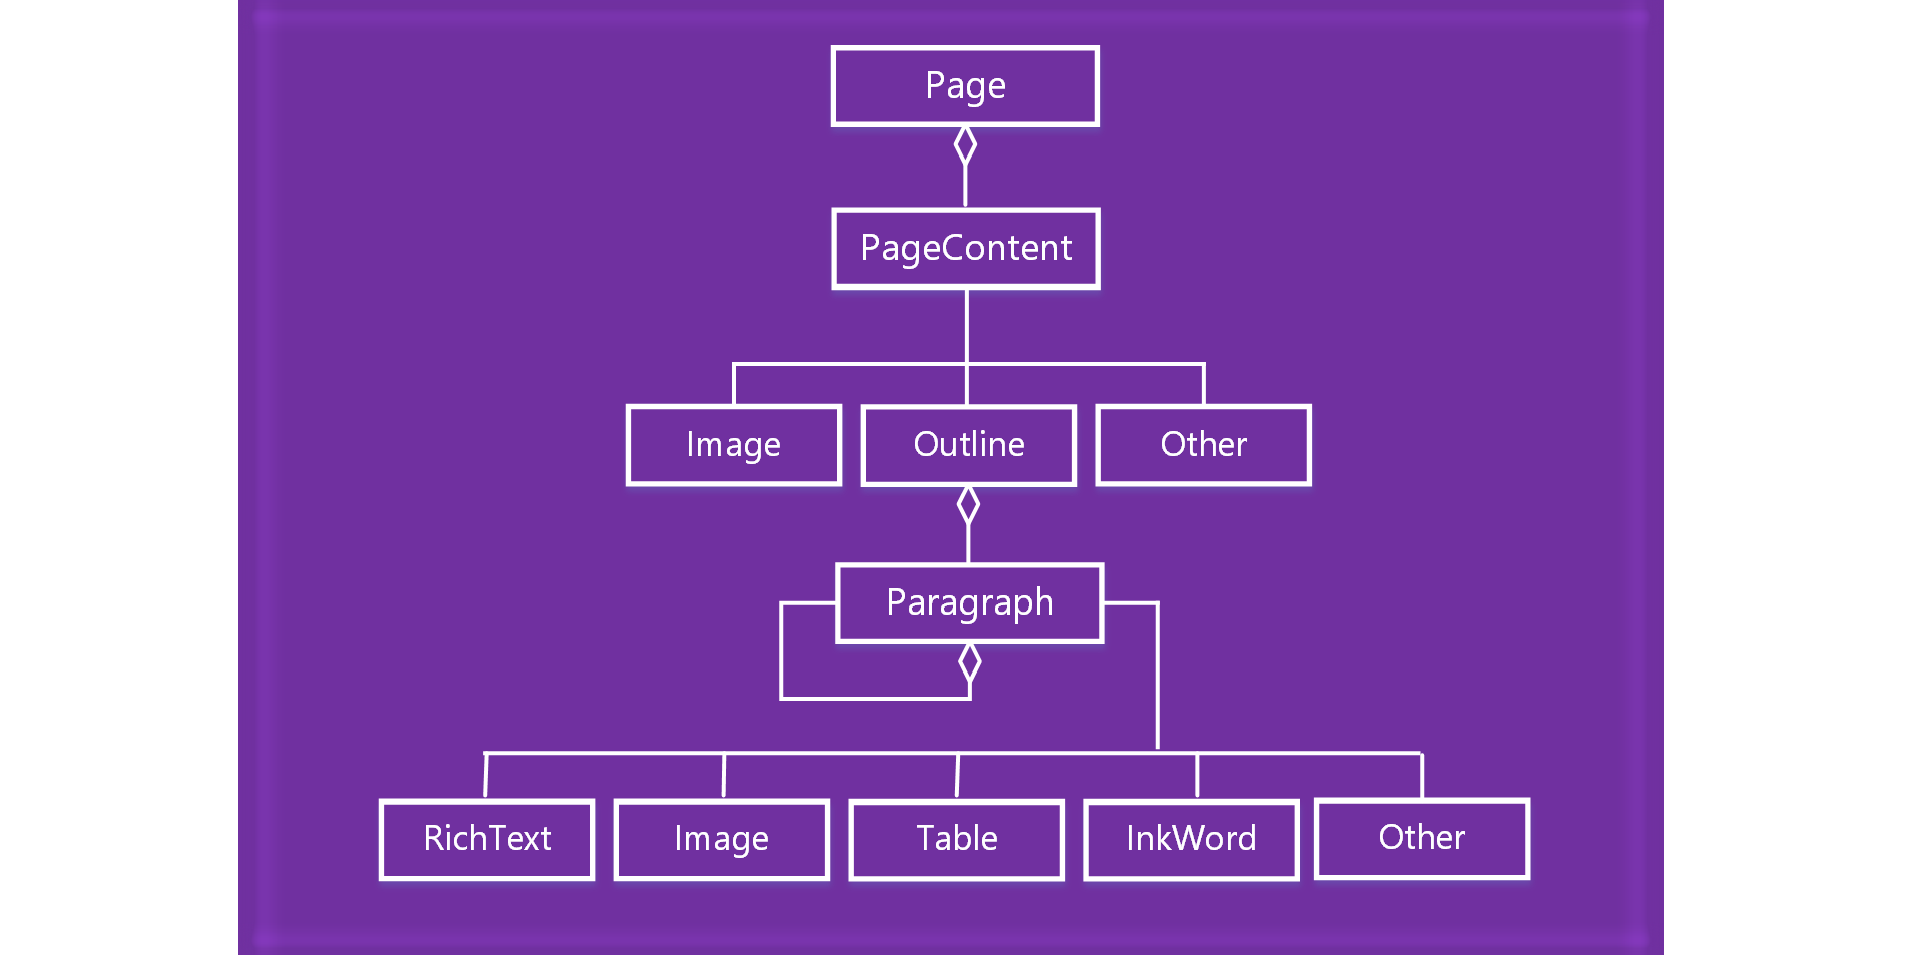 OneNote page object model diagram.